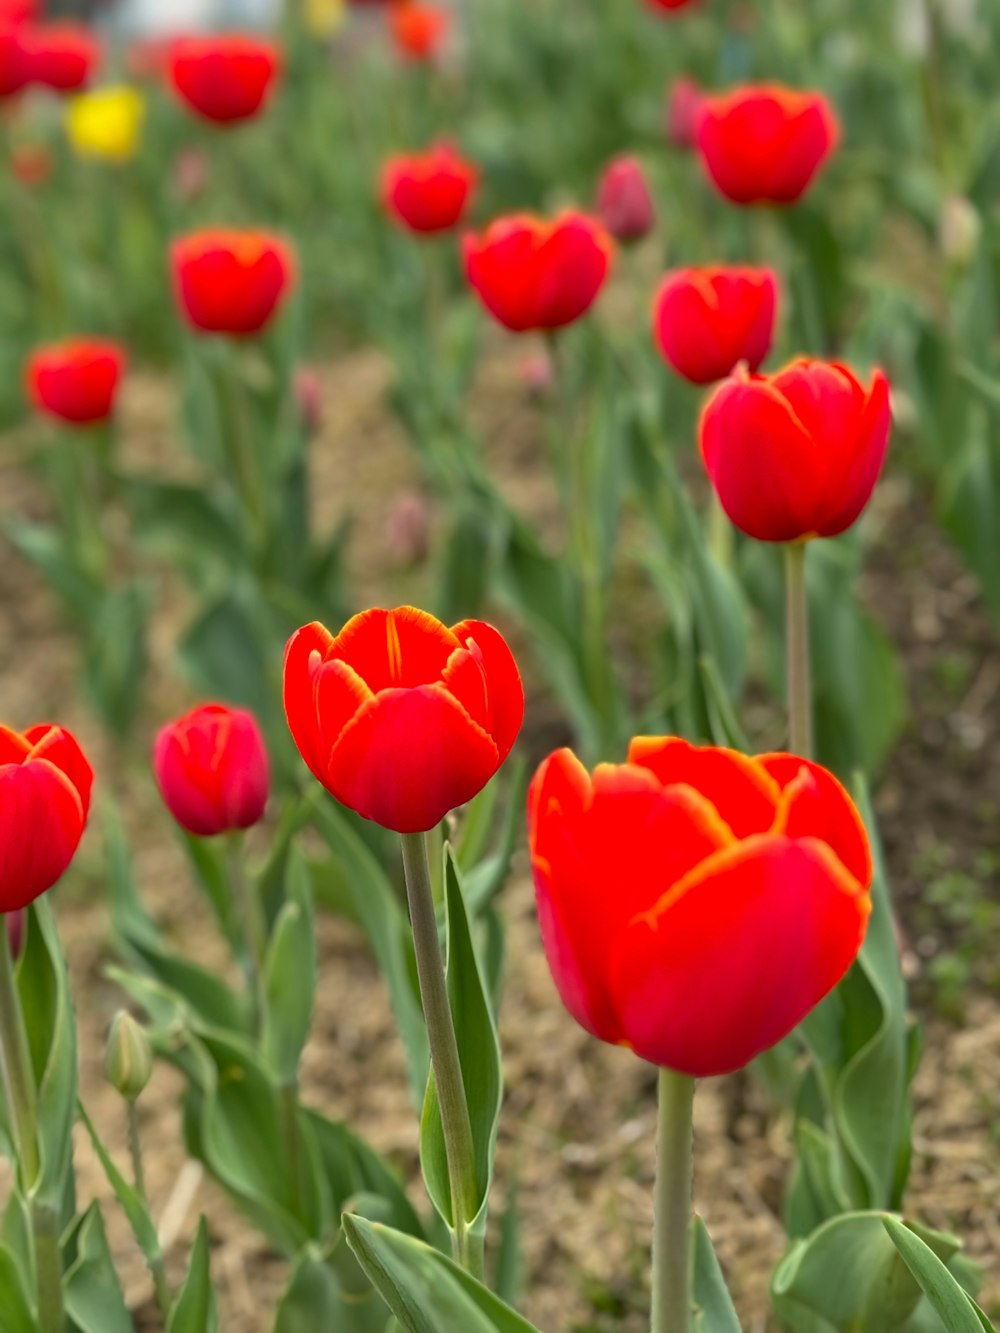 a field of red tulips with yellow tips